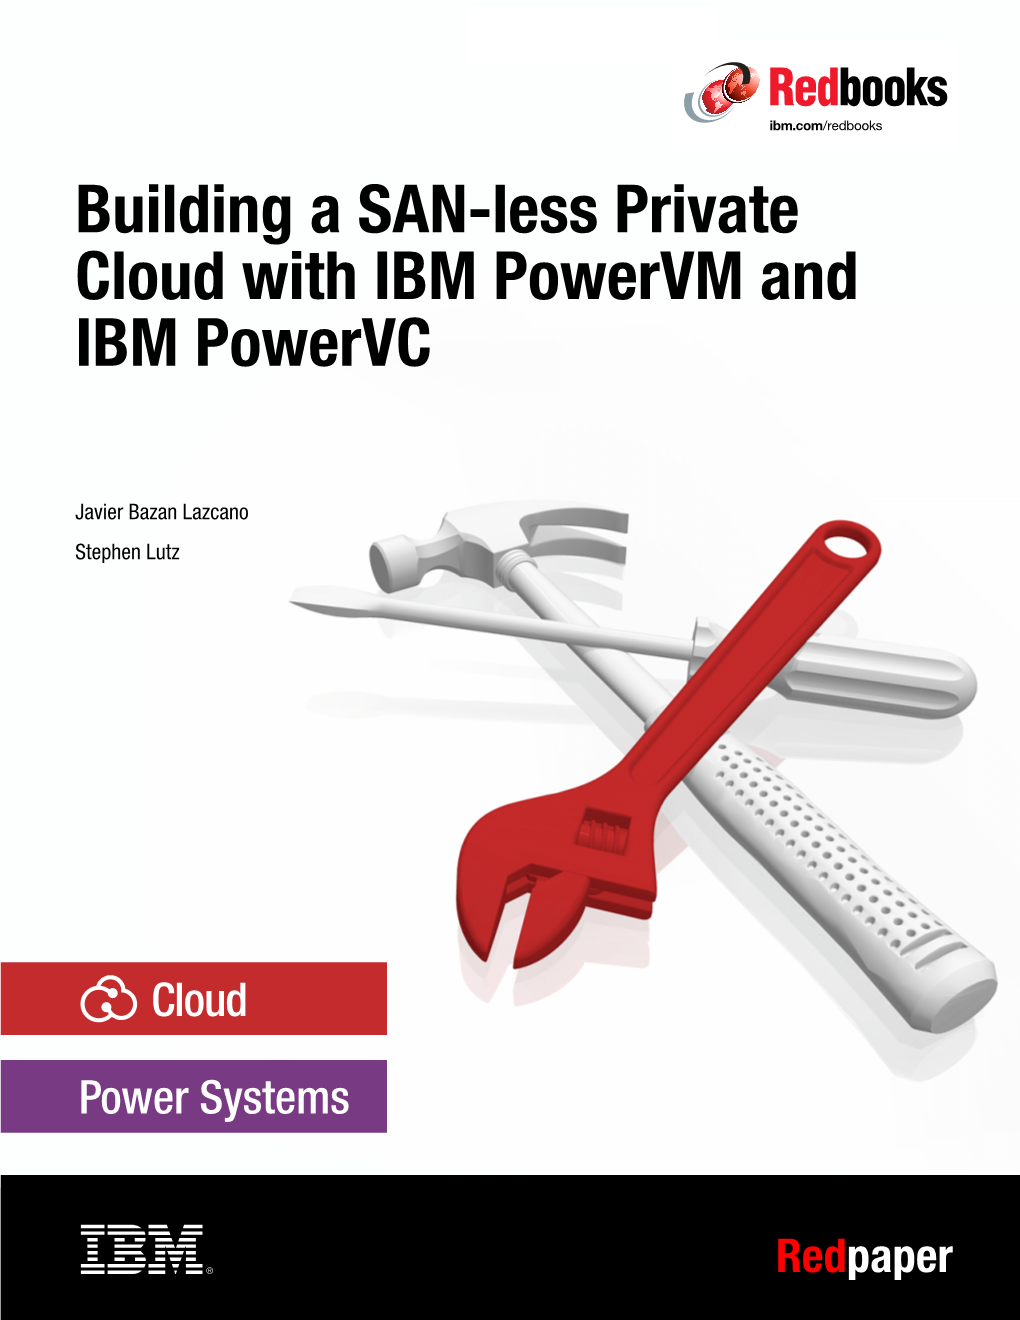 Building a SAN-Less Private Cloud with IBM Powervm and IBM Powervc